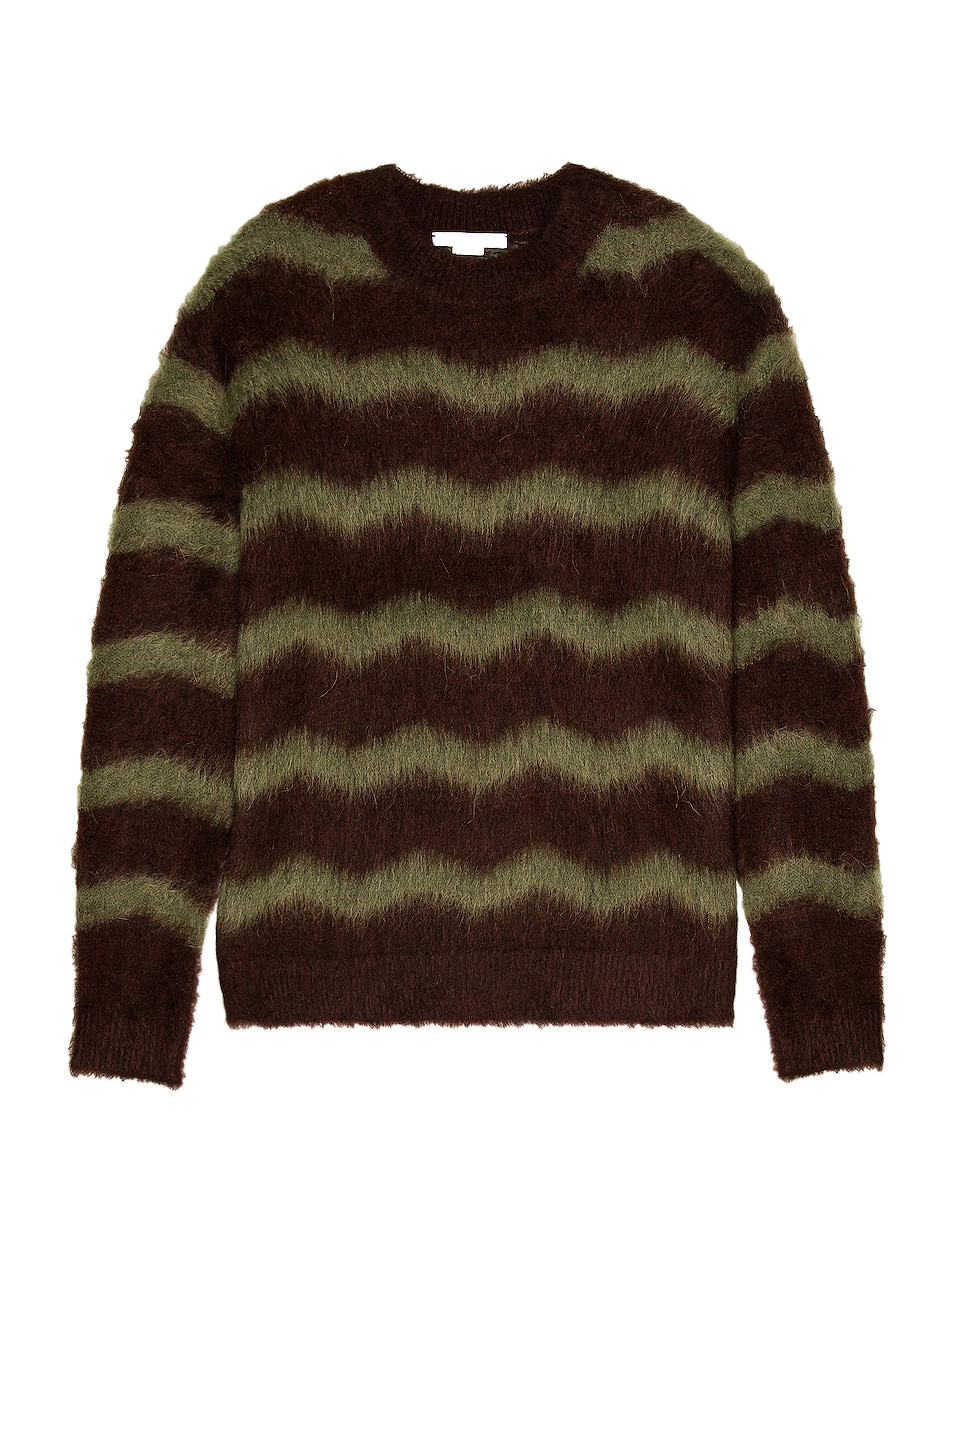 Image 1 of Acne Studios Stripe Knit Sweater in Brown & Military Green